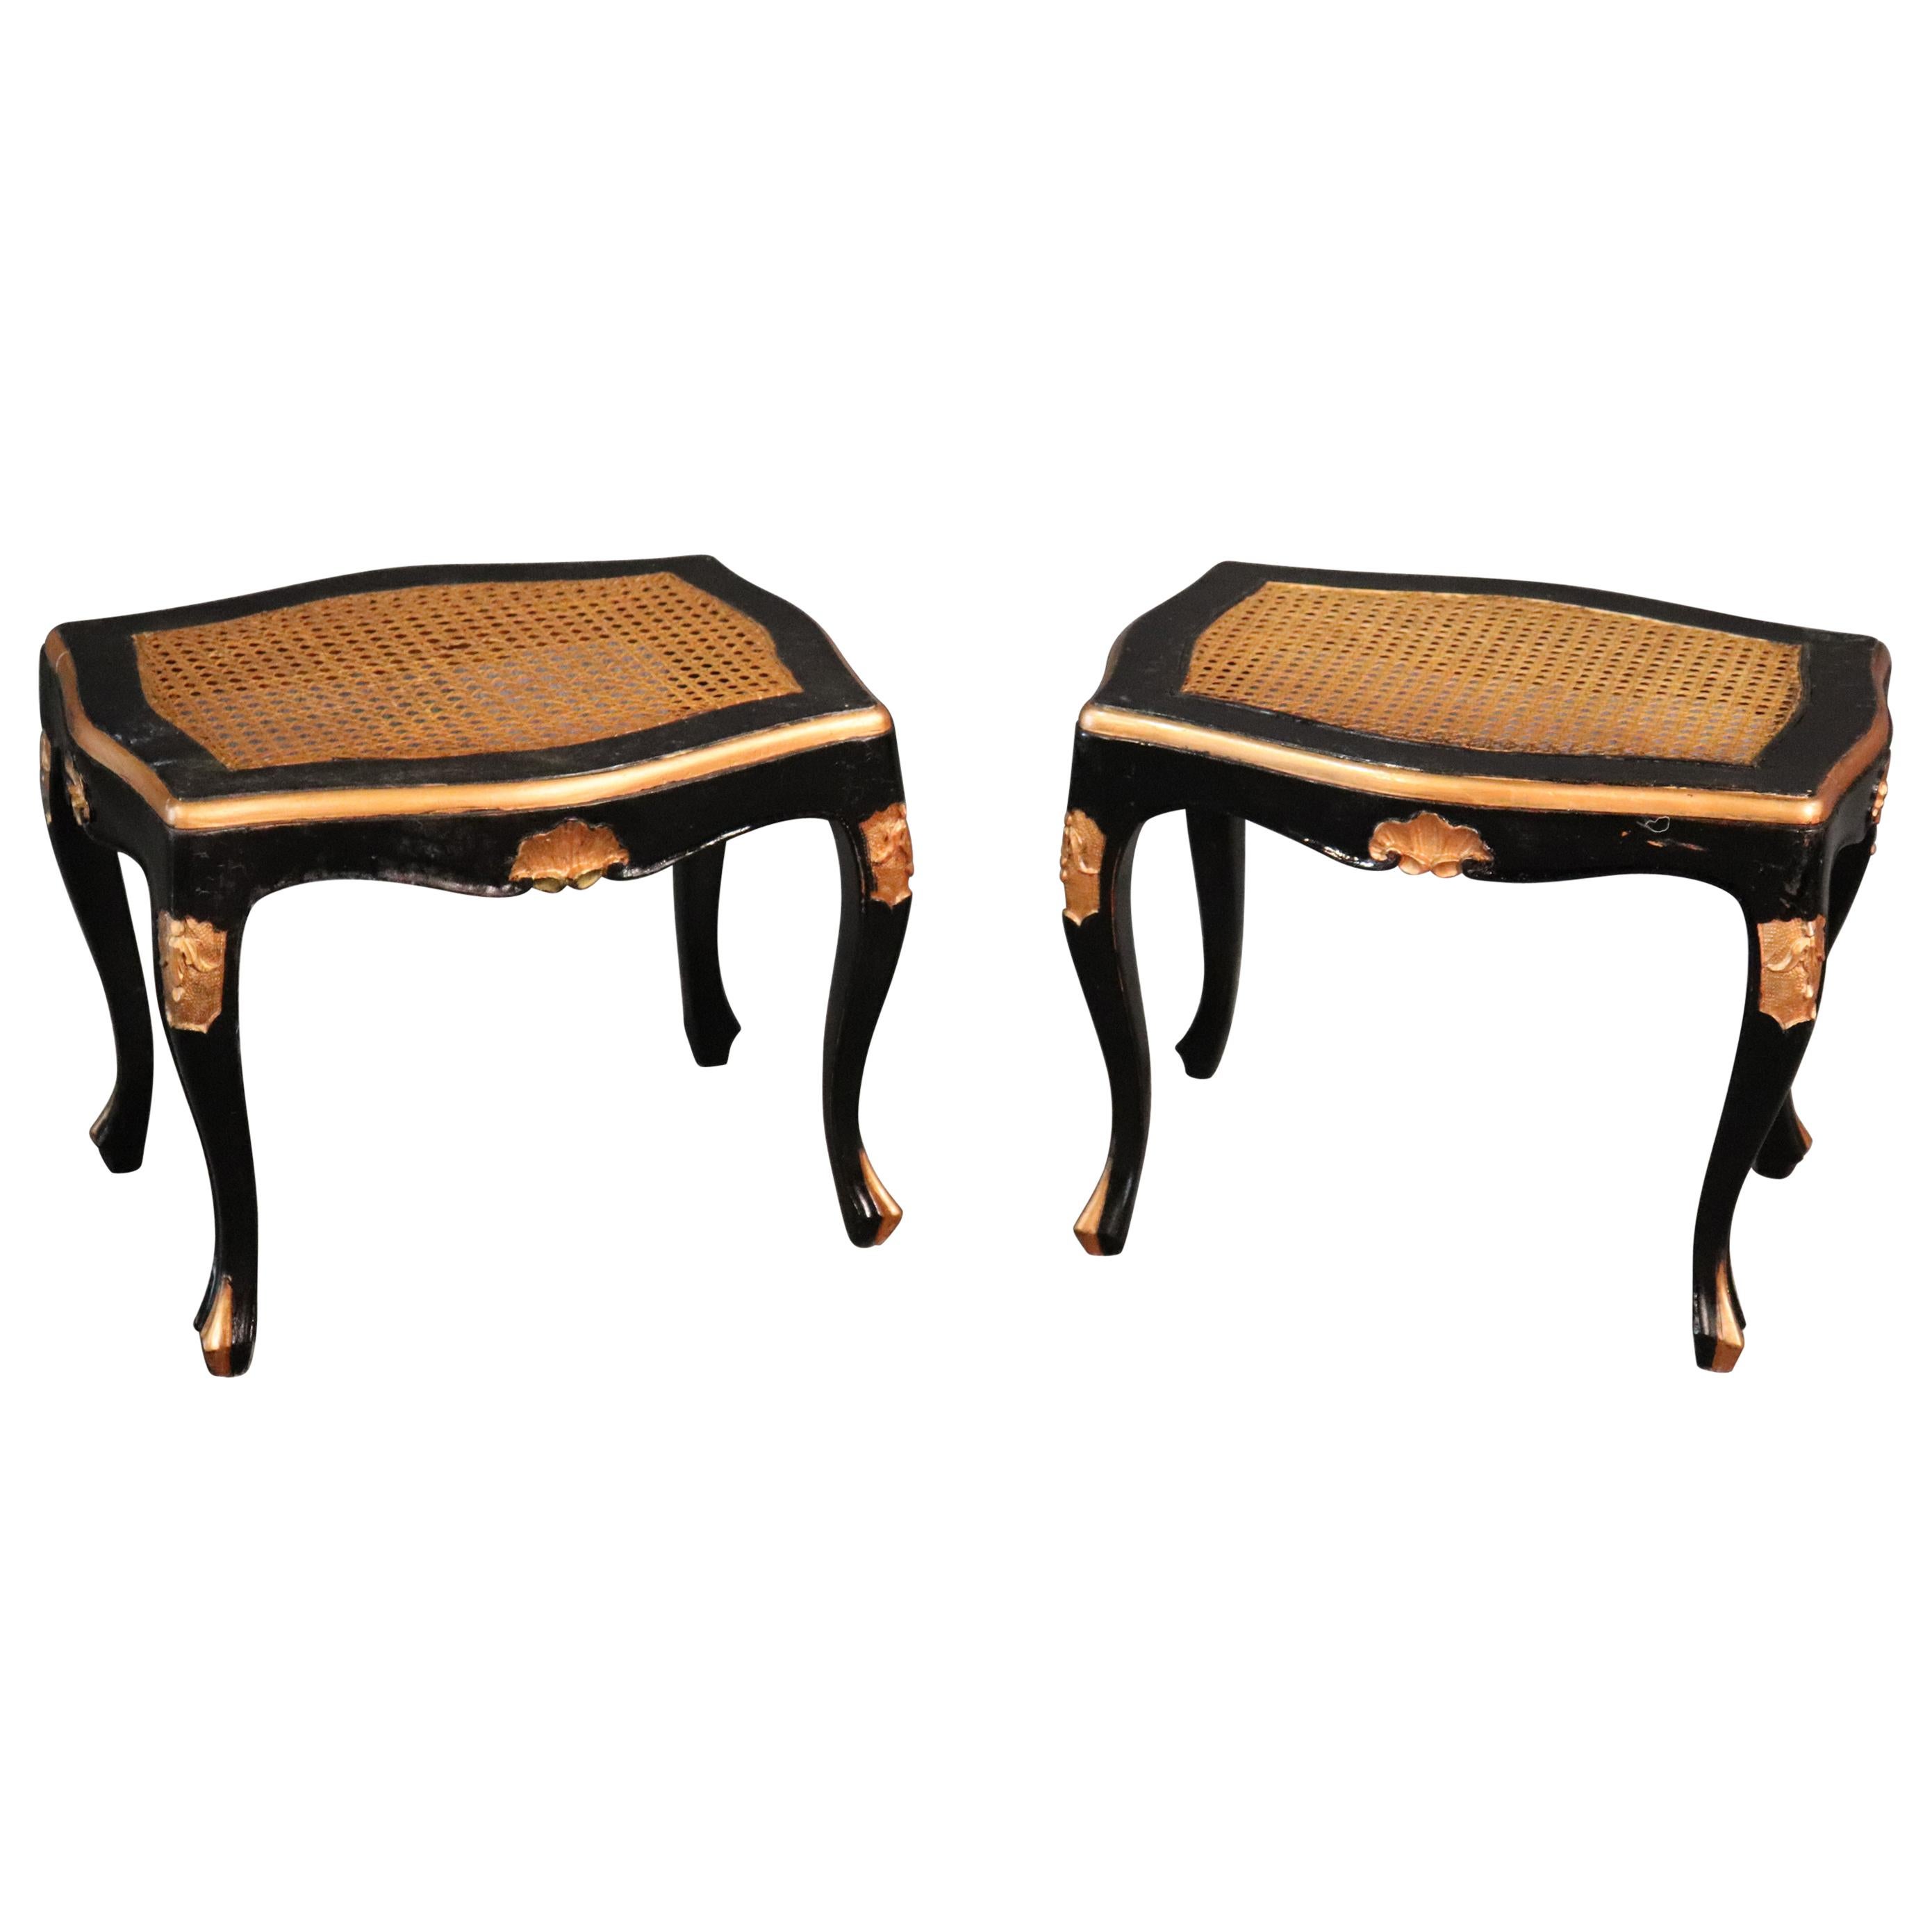 Pair of Ebonized Black Lacquer Cane Gilded French Louis XV Stools Benches